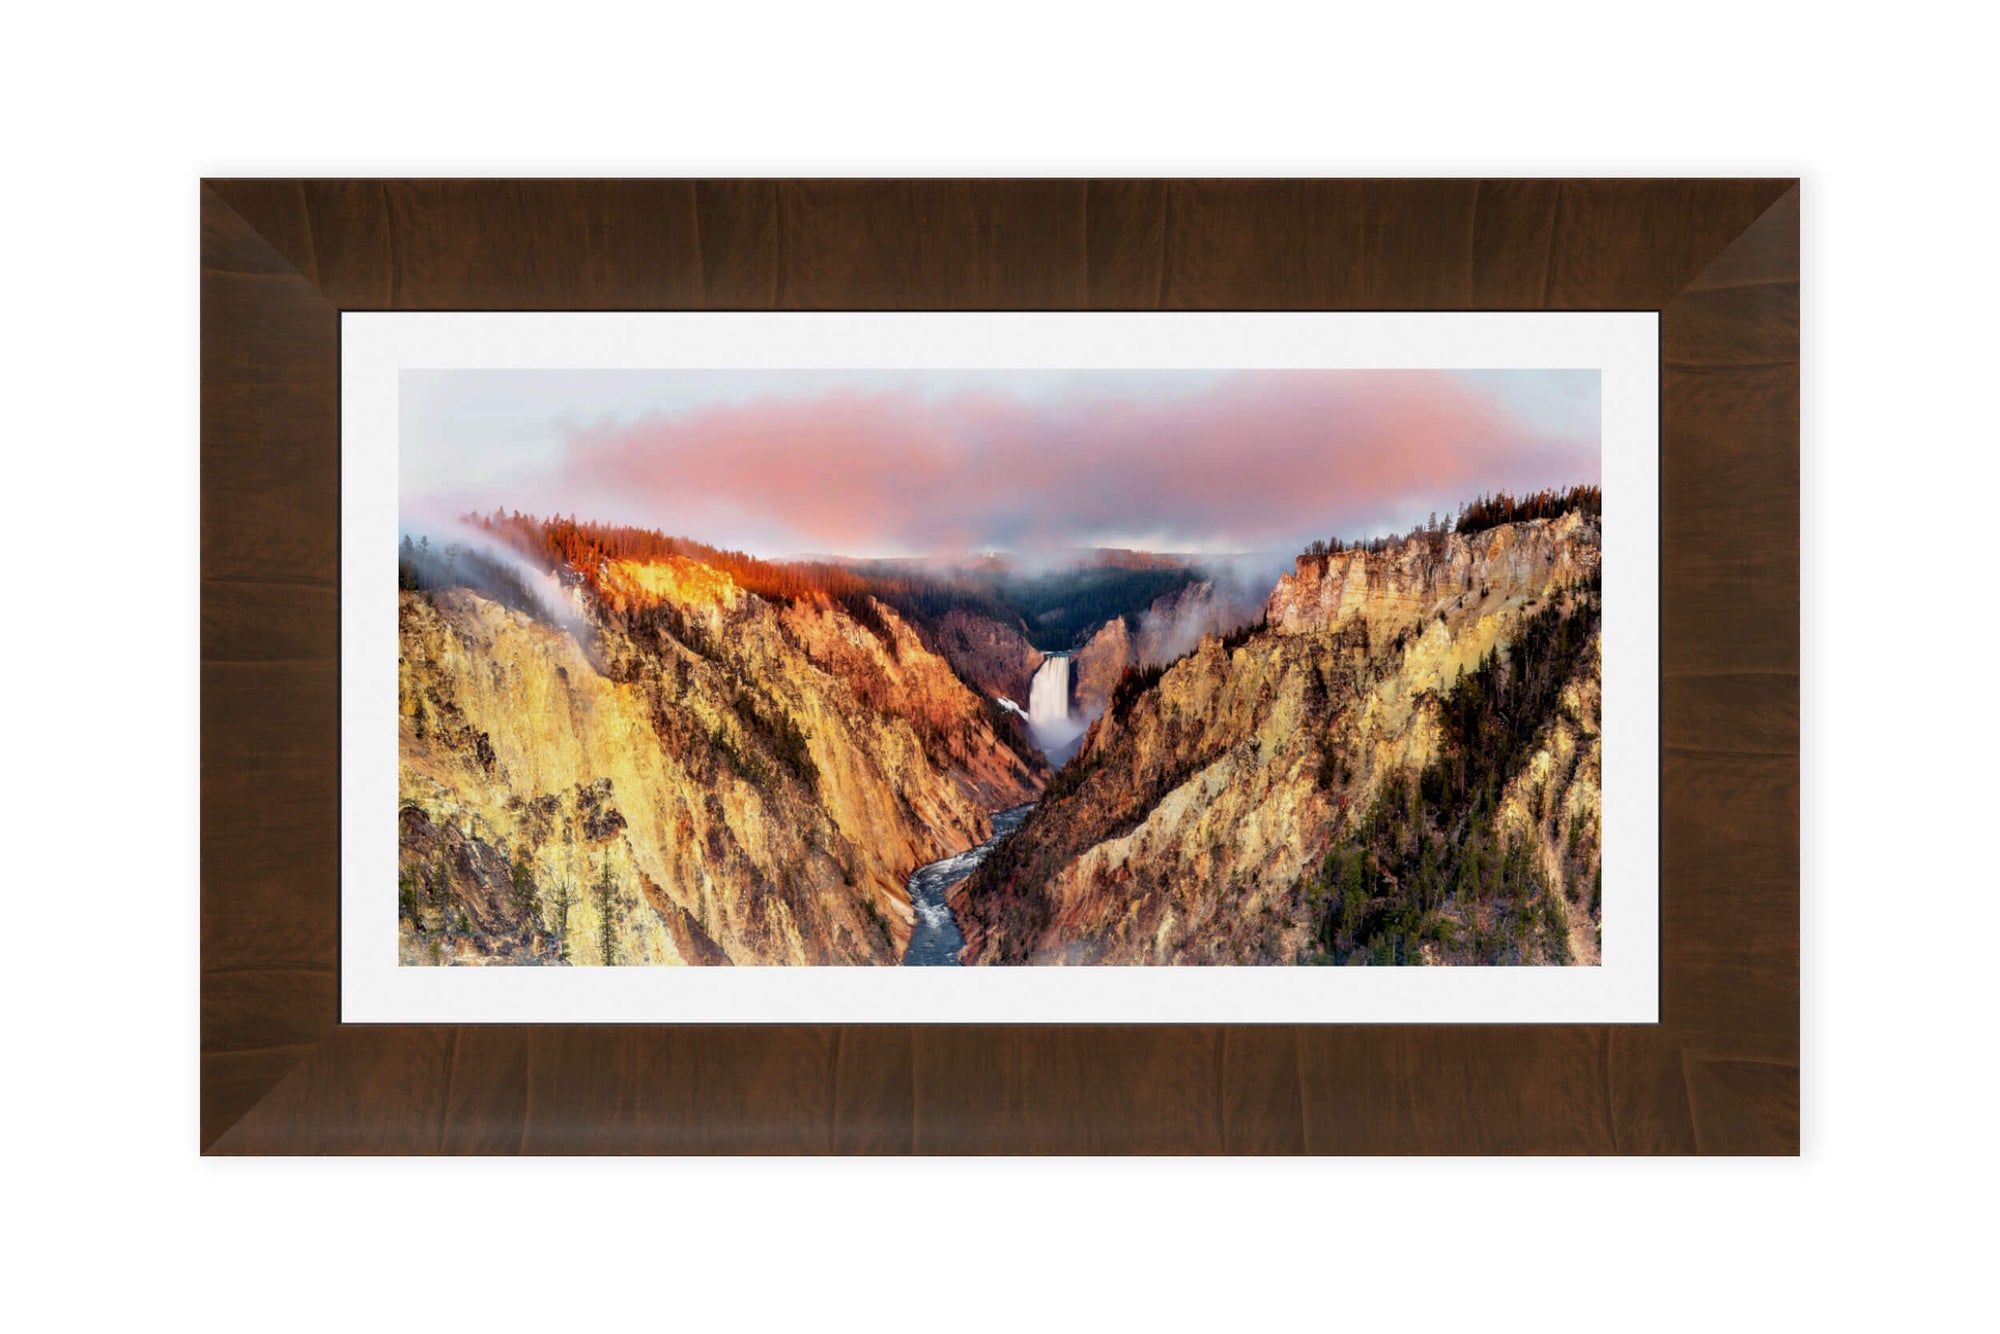 This framed piece of Yellowstone art shows the view from Artist Point into Yellowstone Canyon.